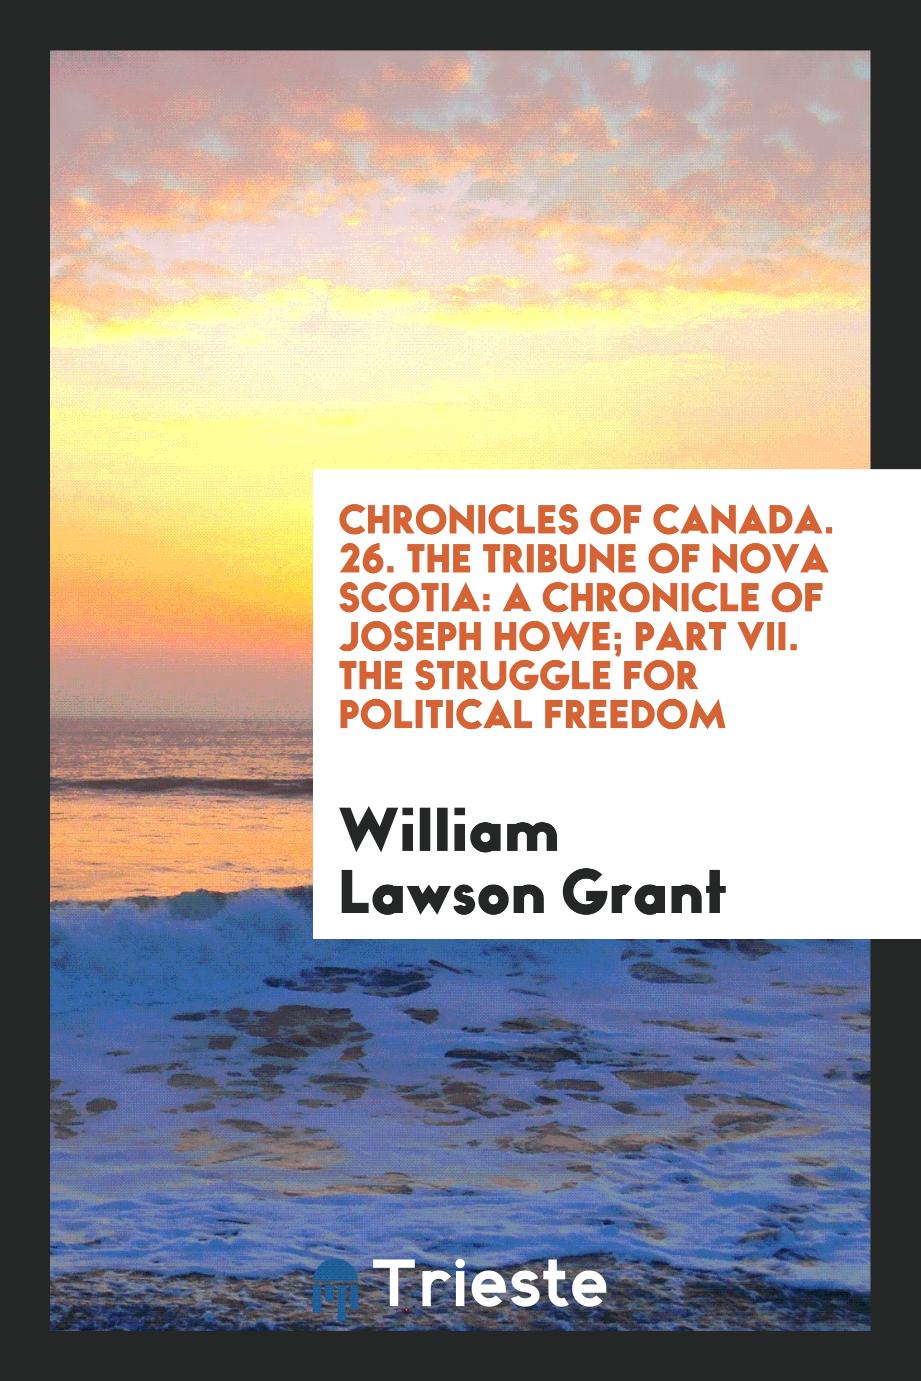 Chronicles of Canada. 26. The Tribune of Nova Scotia: A Chronicle of Joseph Howe; Part VII. The Struggle for Political Freedom